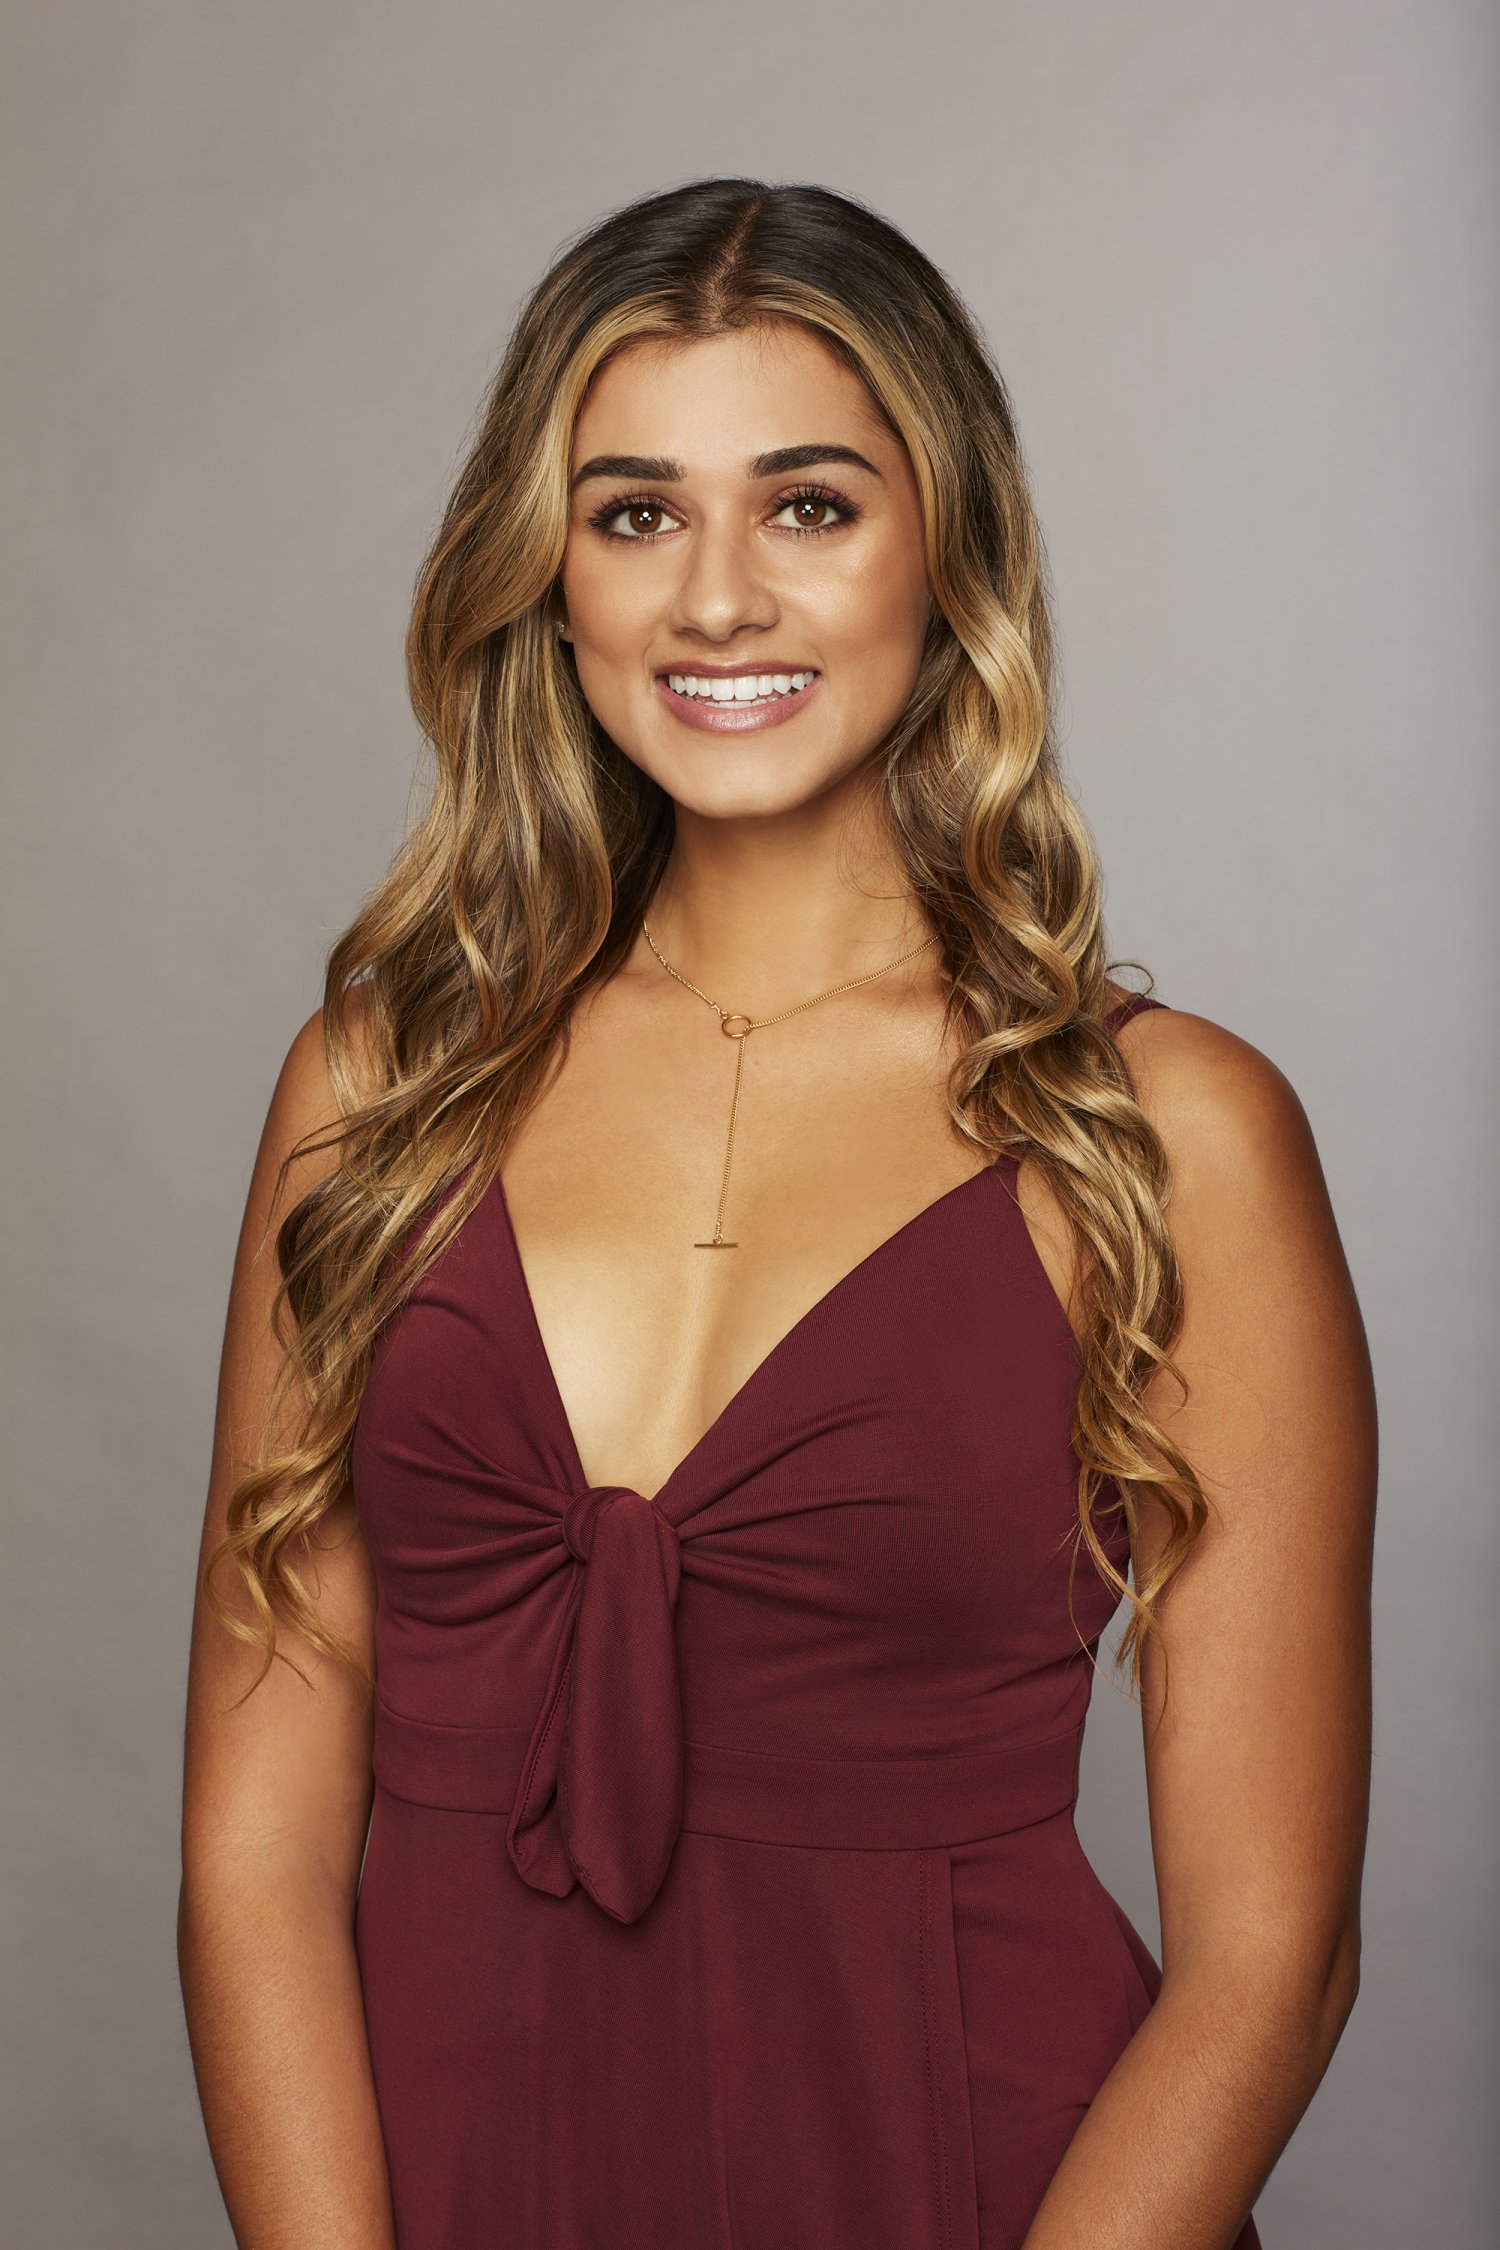 Bachelor 23 - Kirpa Sudick - Discussion - *Sleuthing Spoilers* 4845-o